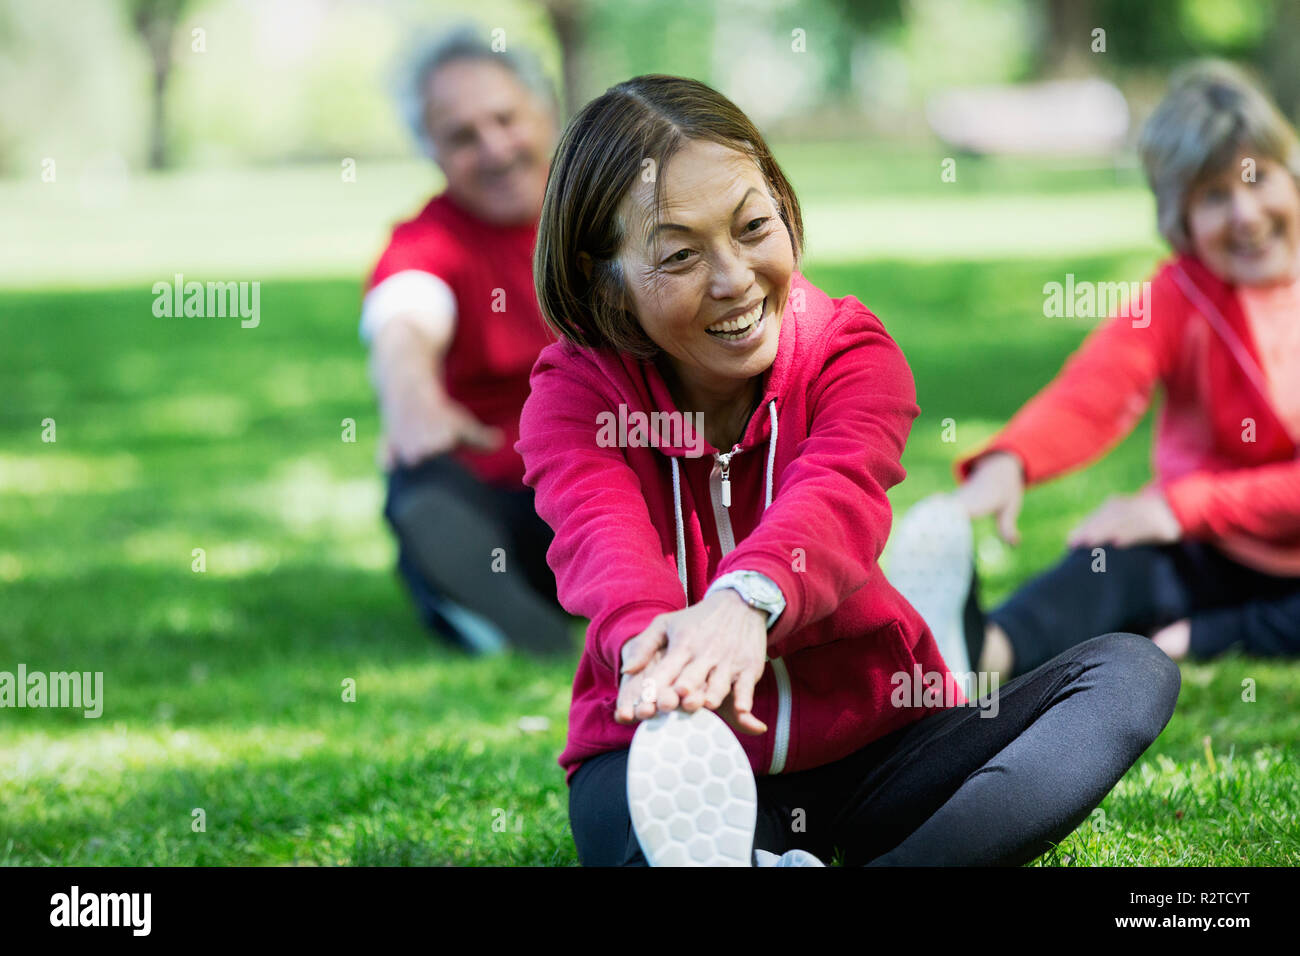 Happy active senior woman stretching leg in park Banque D'Images